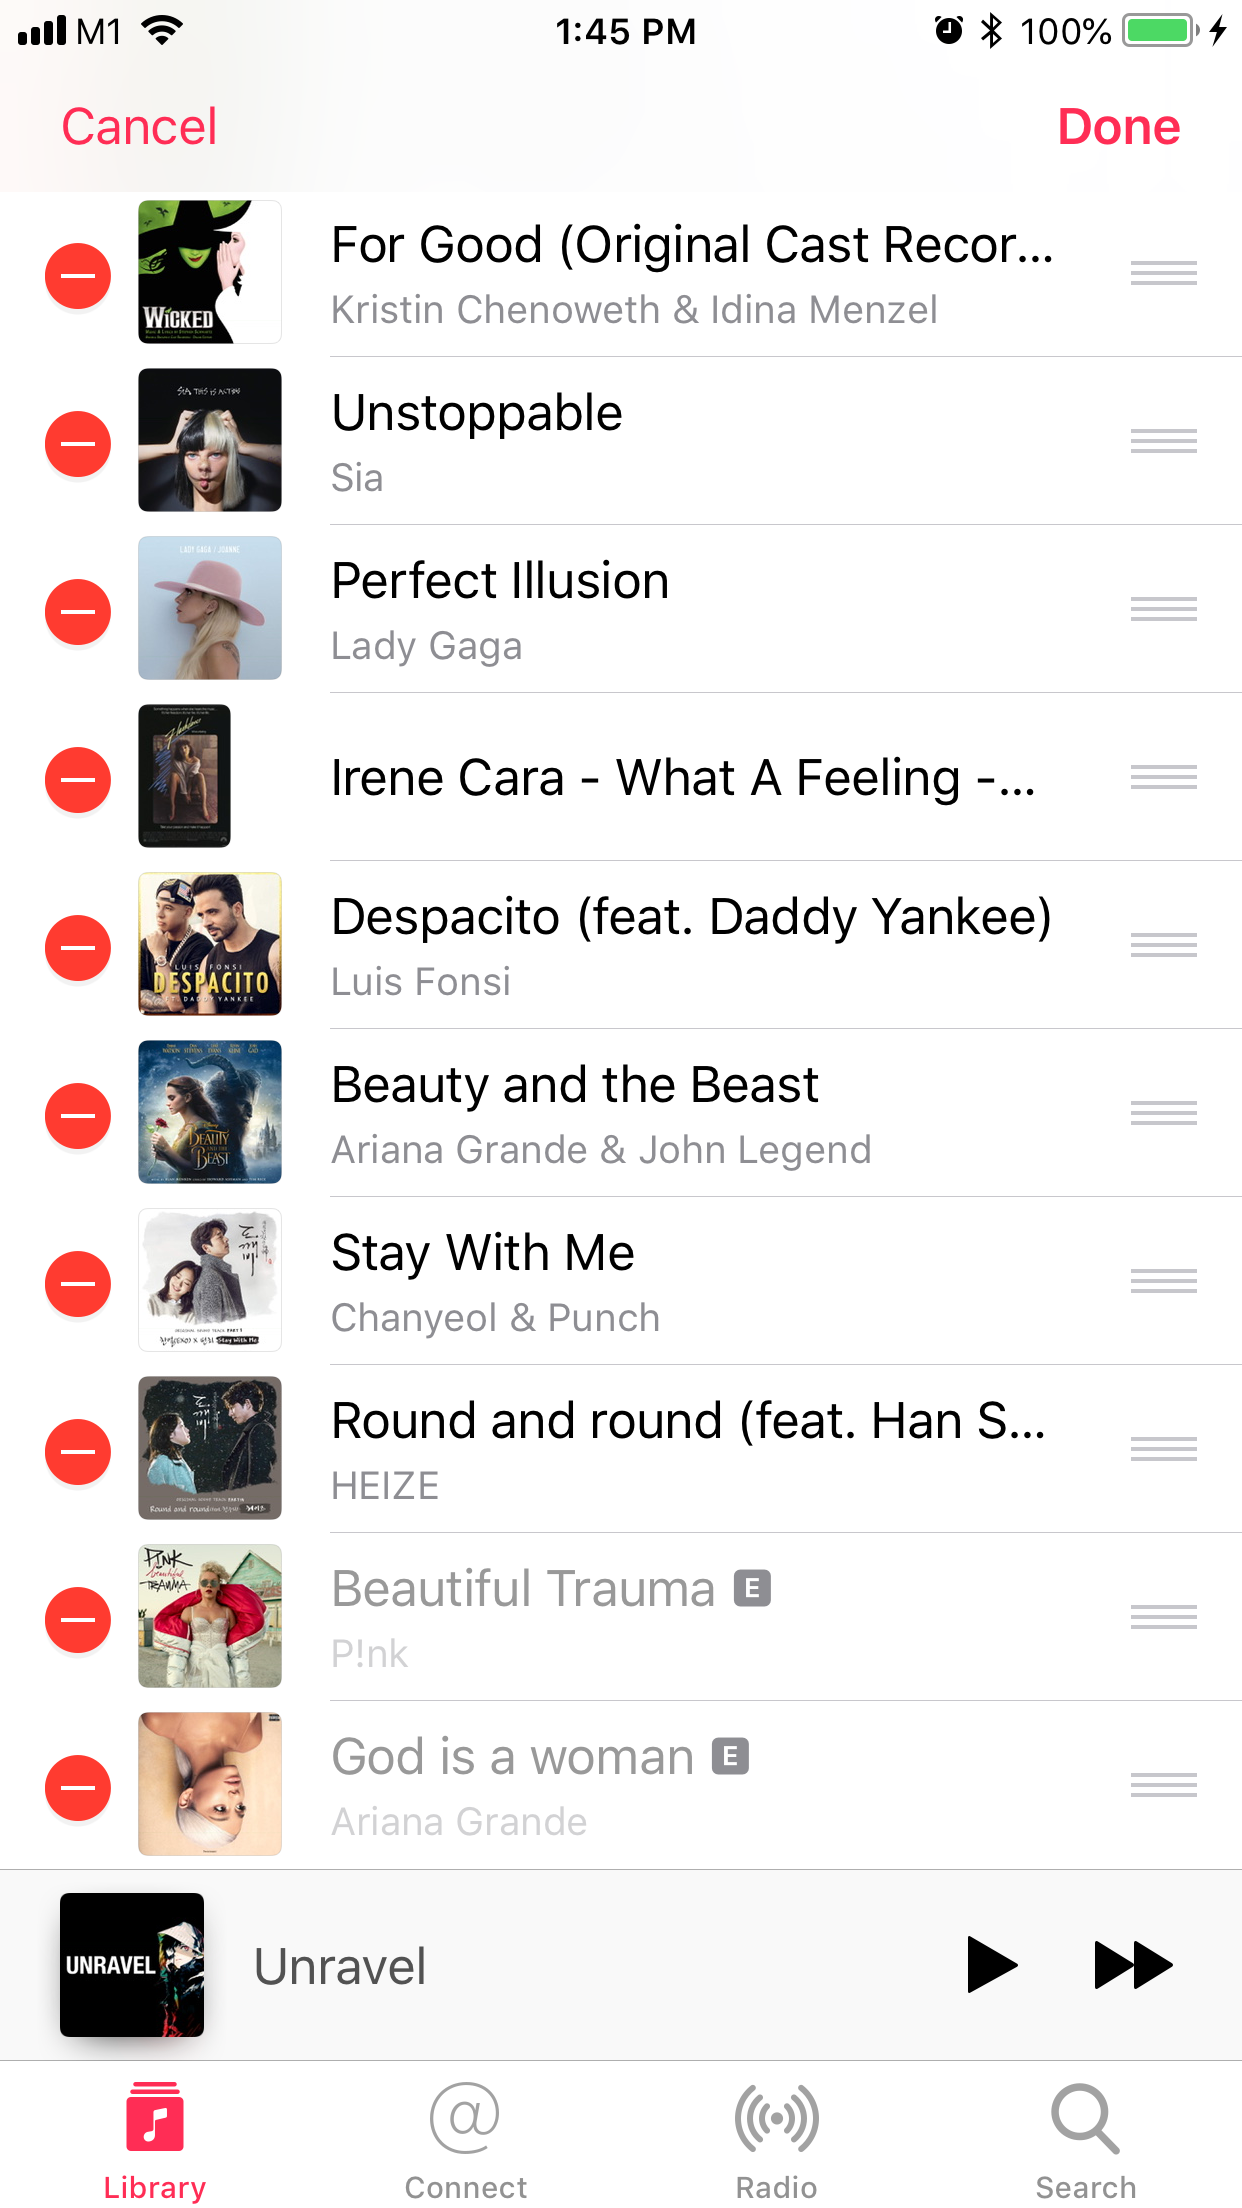 iTune cannot sync songs to my iphone - Apple Community